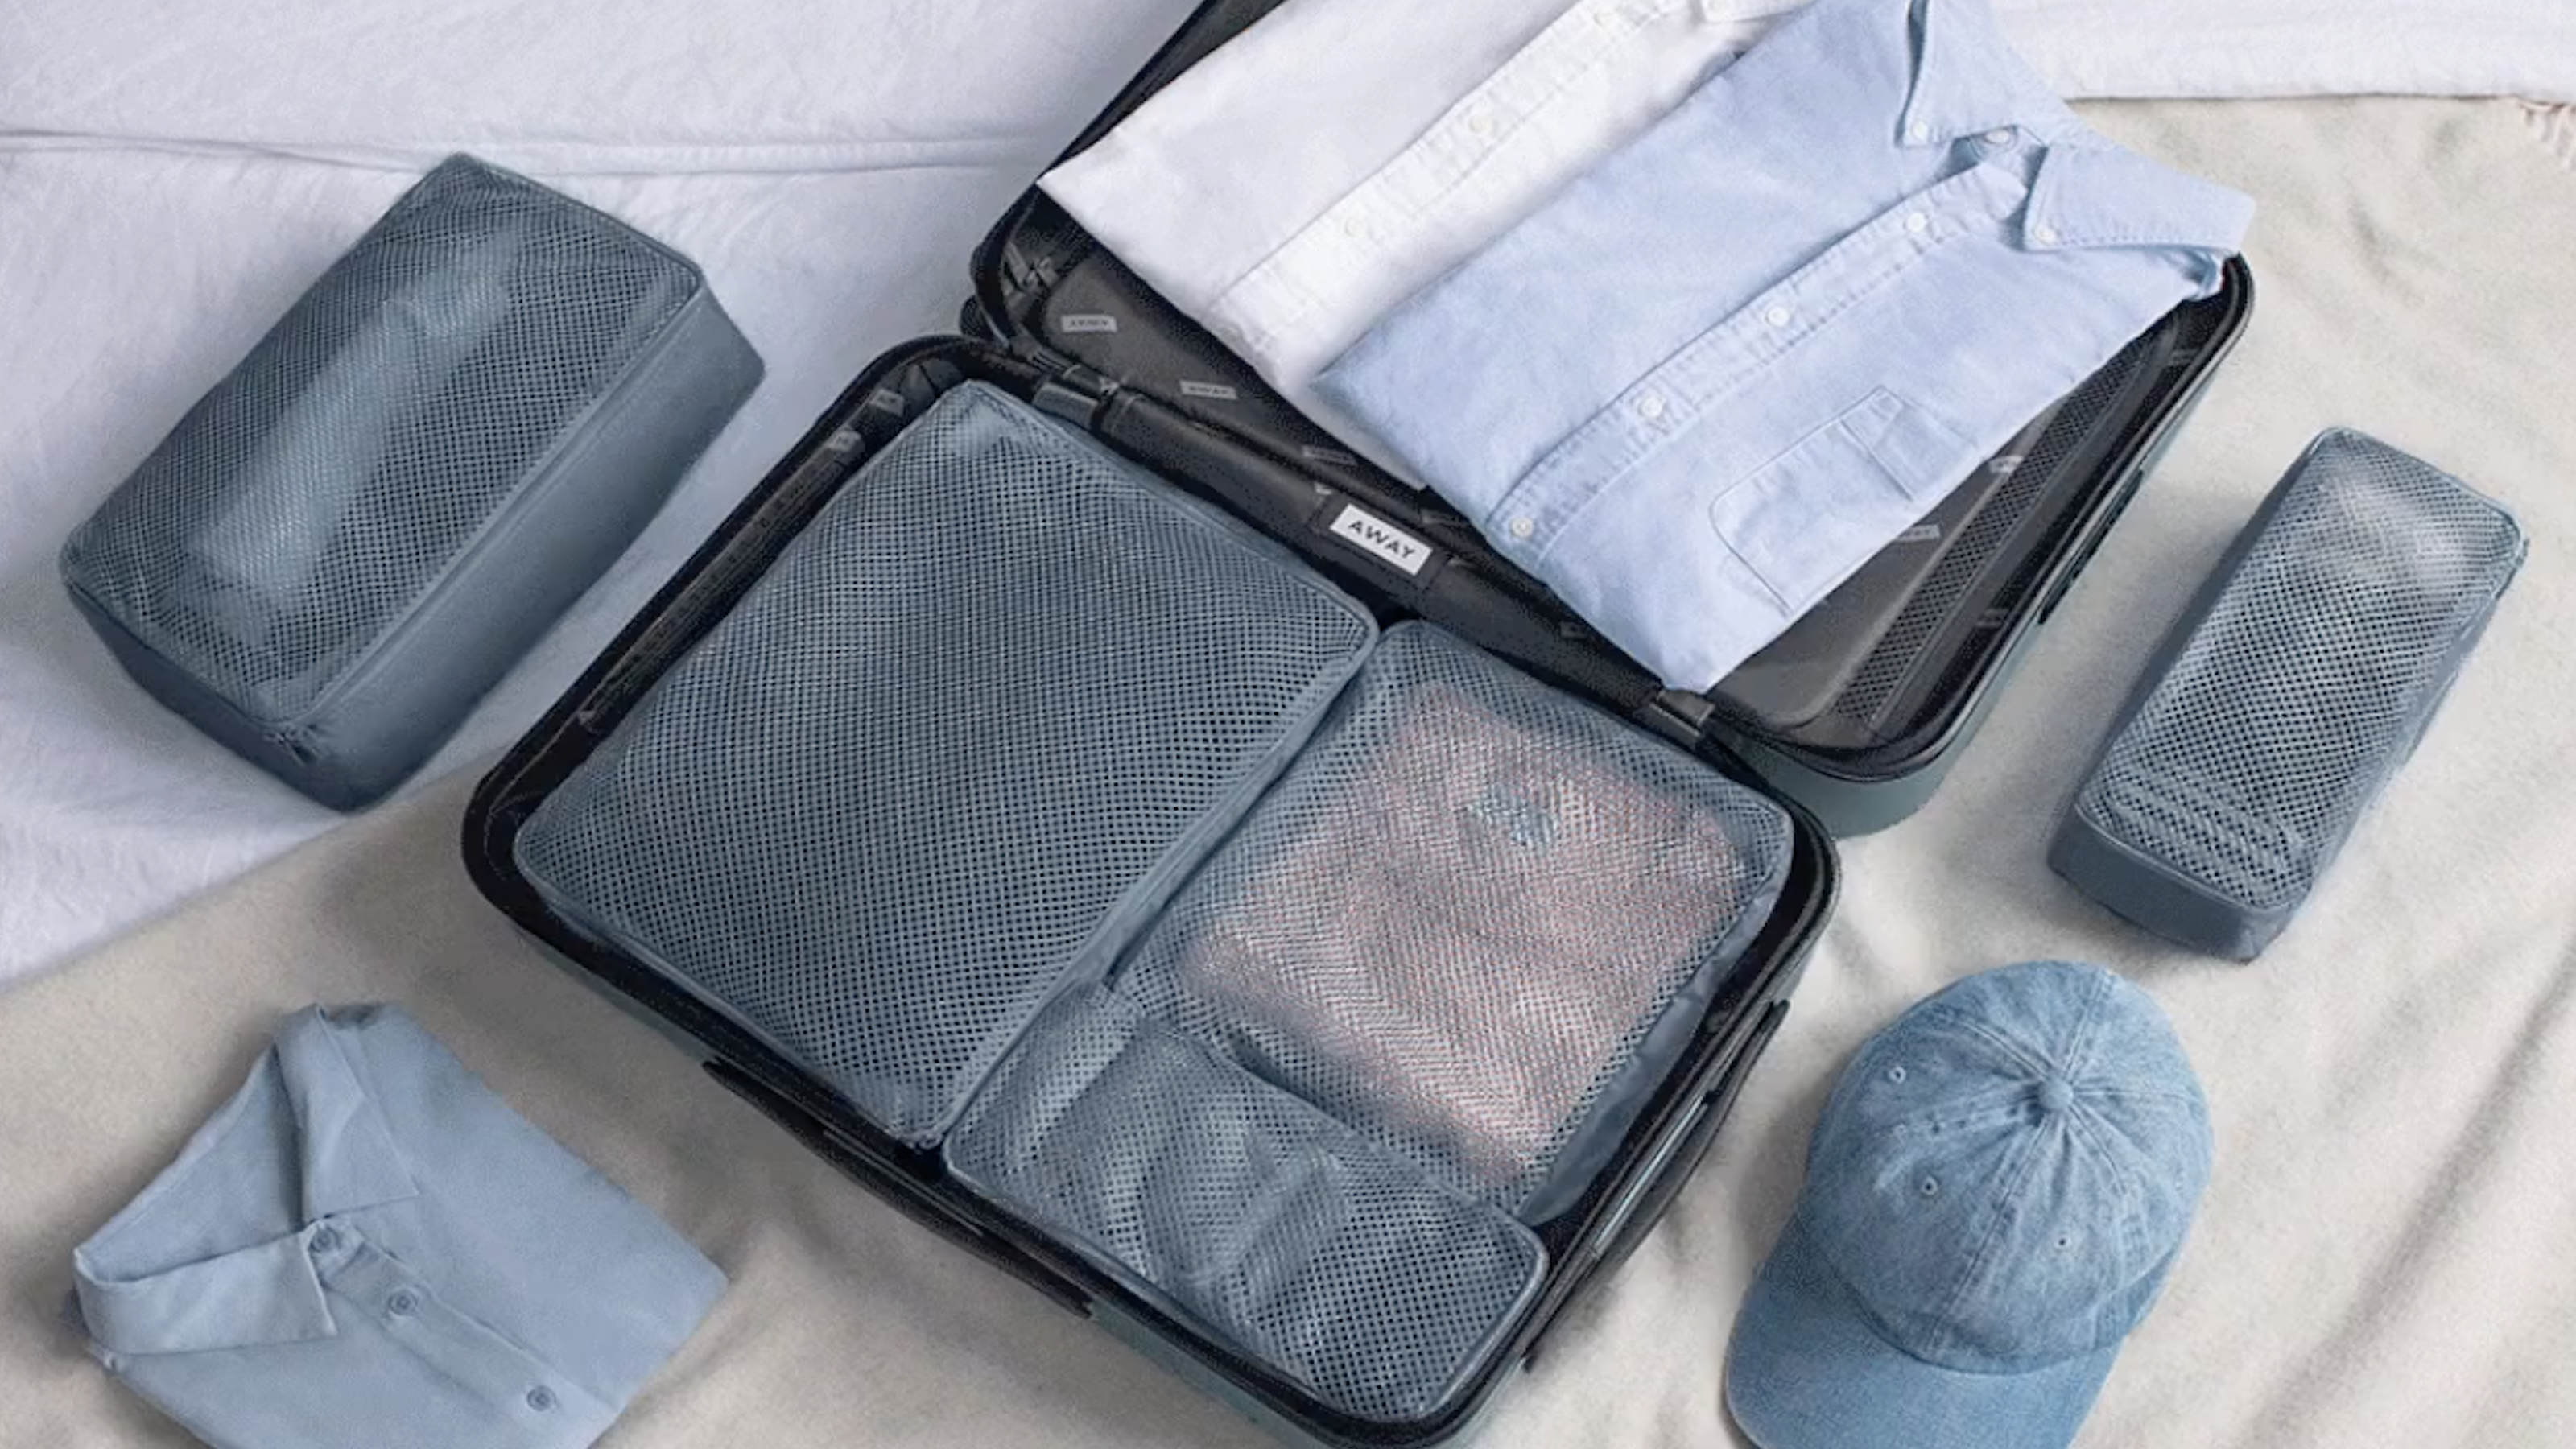 5 best packing cubes, according to experts